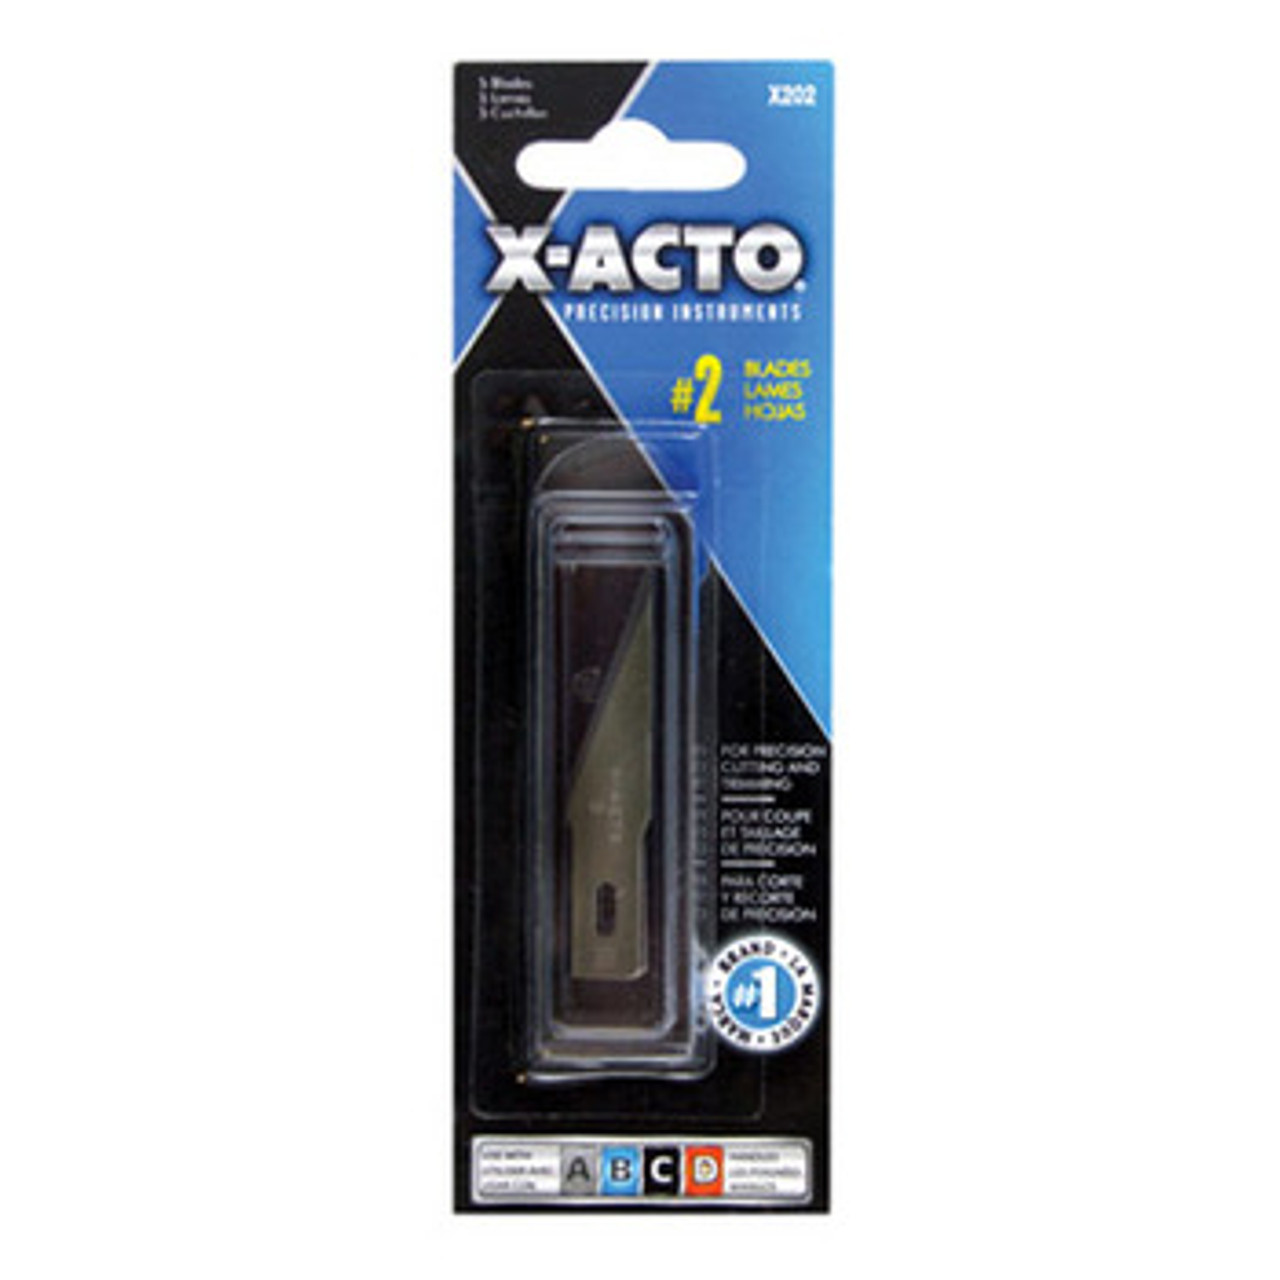 X-acto X202 # 2 Blade , 5 pack